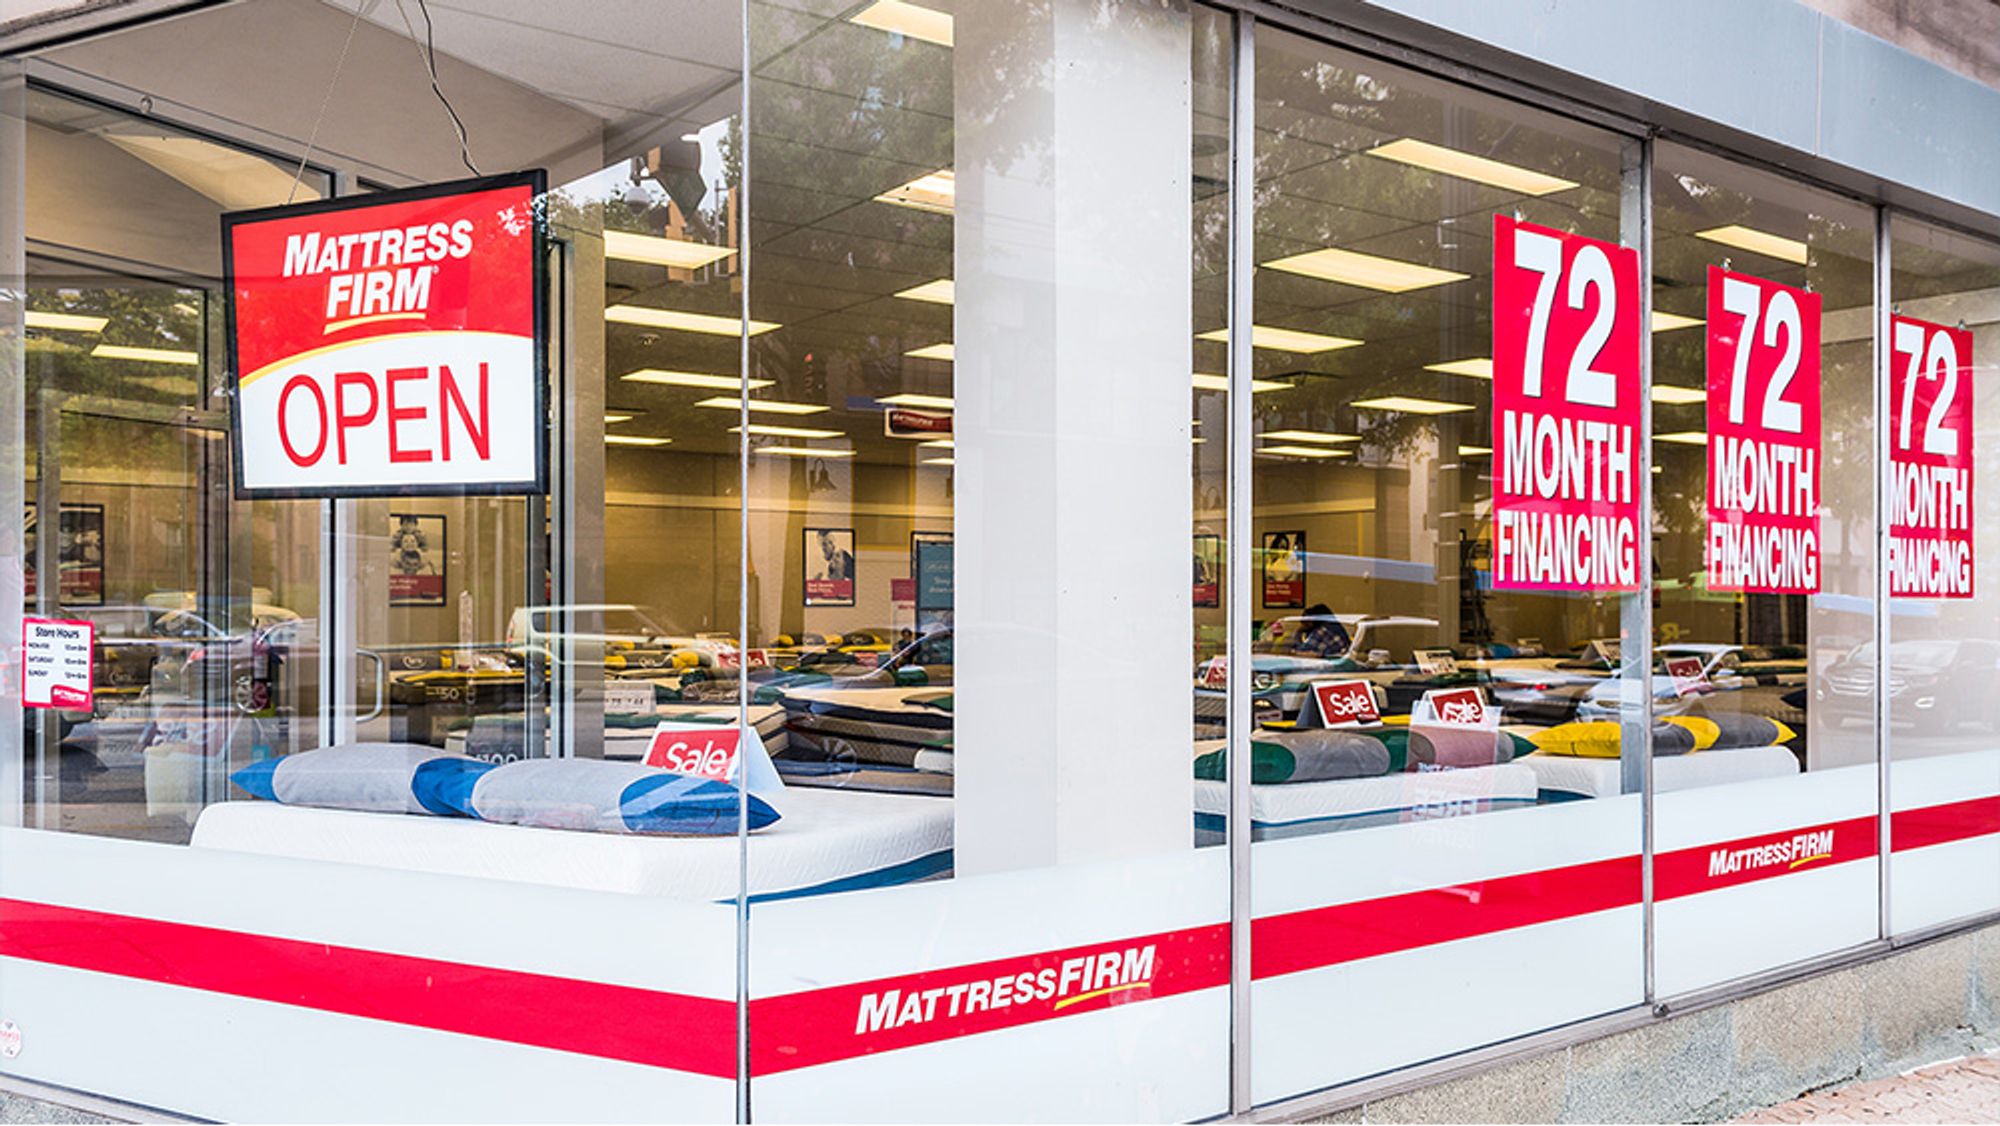 is tempur sealy buying mattress firm